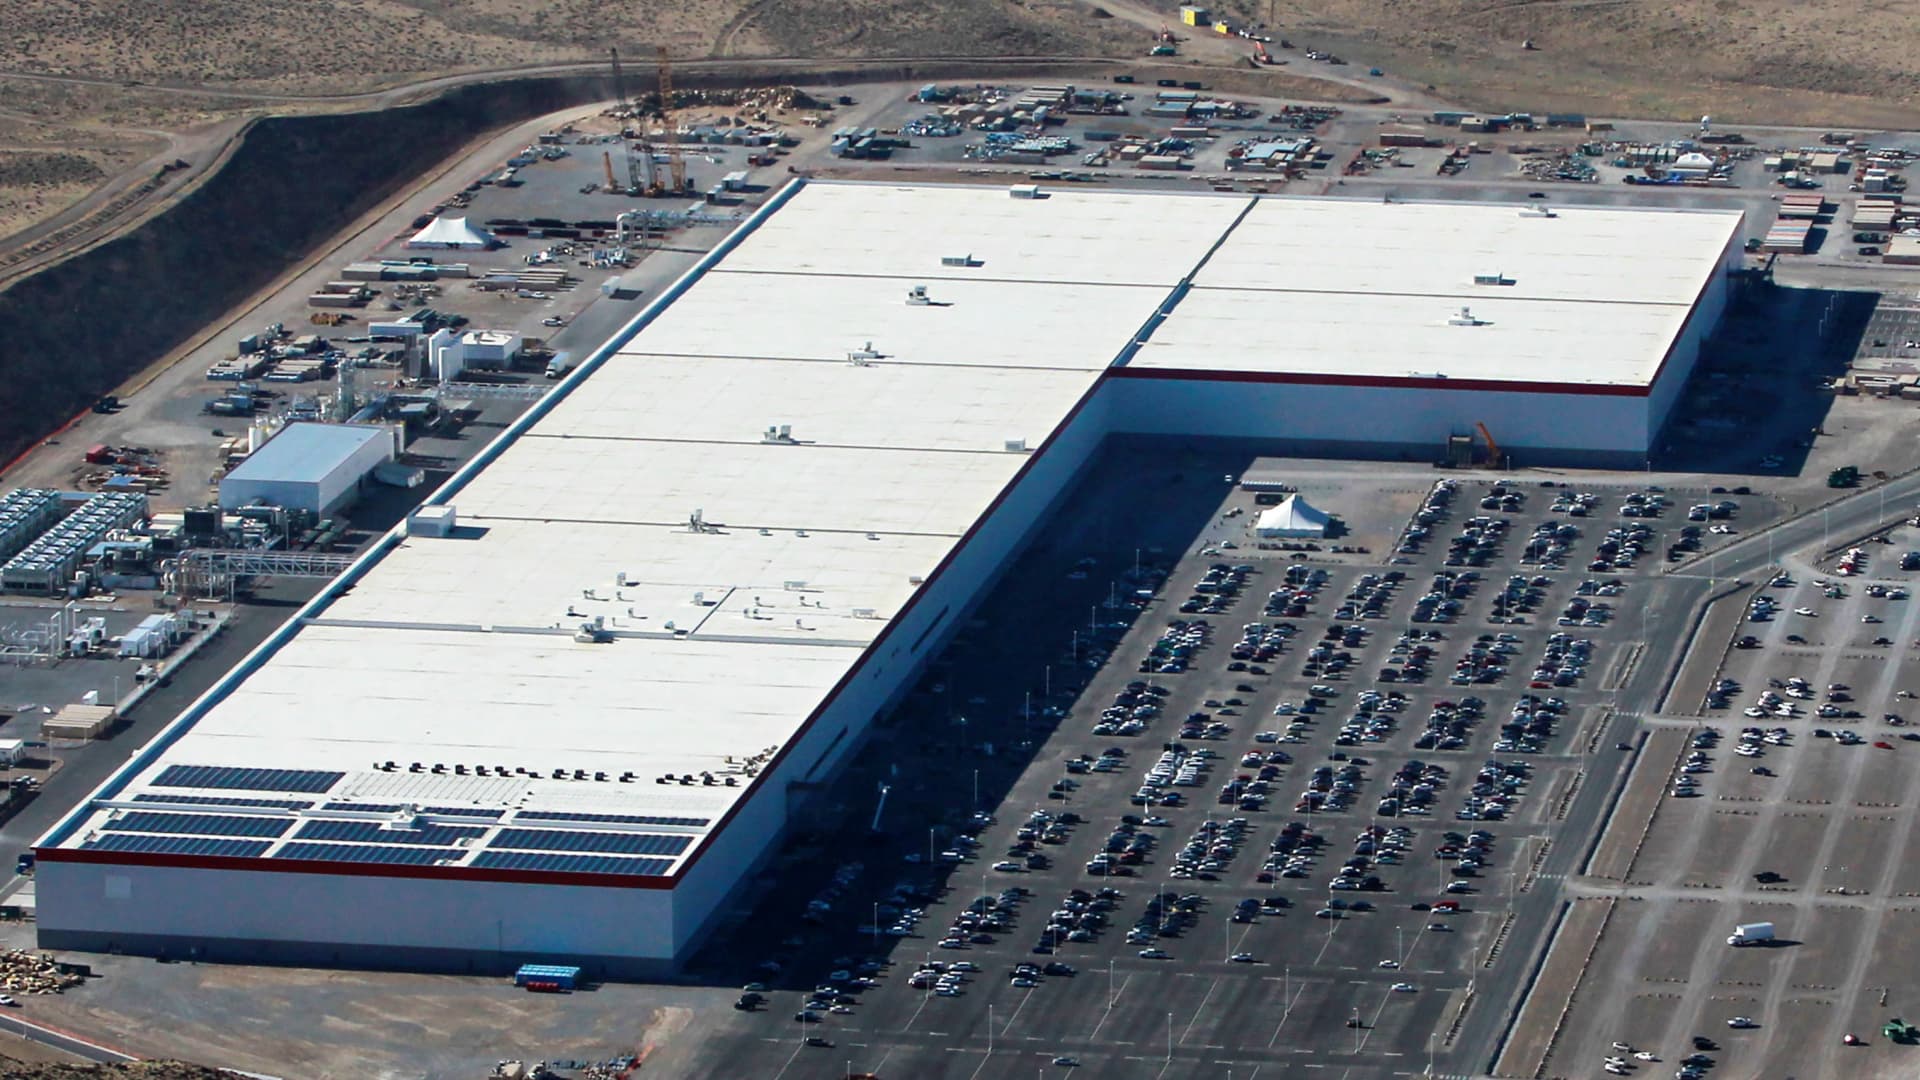 Panasonic reportedly building new factory in Kansas to produce batteries for Tesla and rest of EV industry